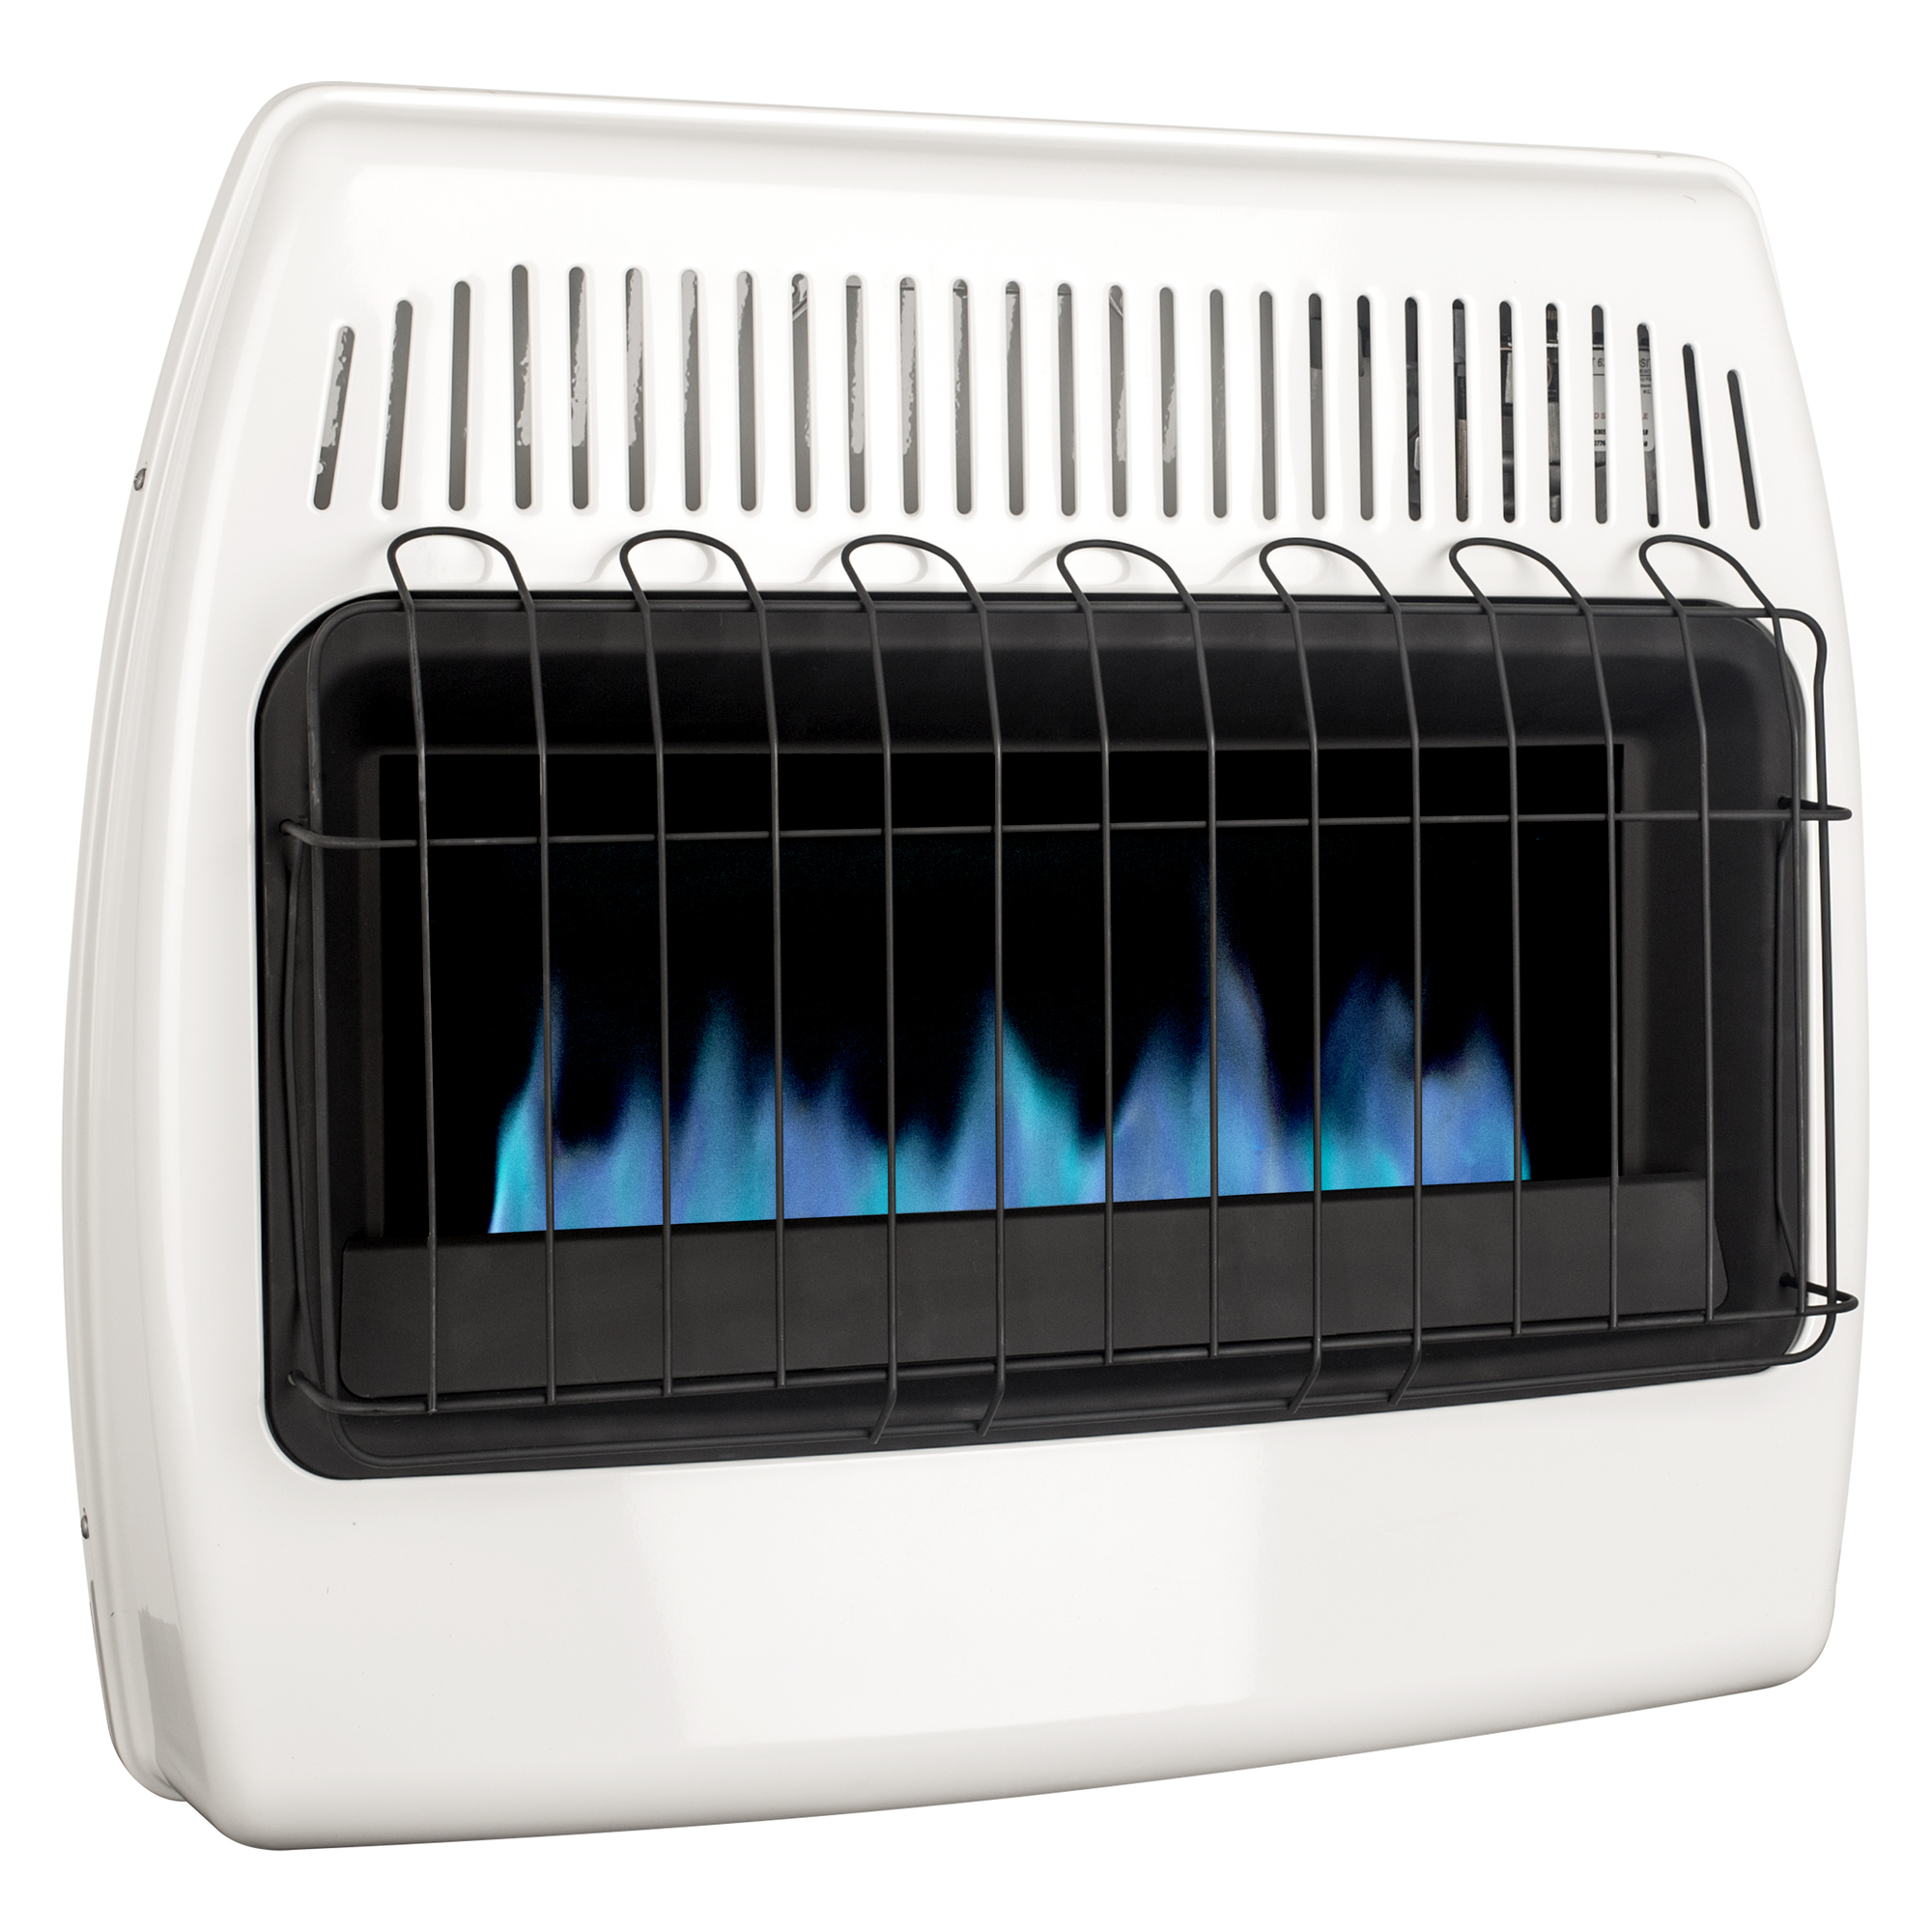 Dyna Glo, 30K BTU NG Blue Flame Vent Free Wall Heater, Heat Output 30000 Btu/hour, Heating Capability 1000 ft², Fuel Type Natural Gas, Model BF30NMDG- -  Dyna-Glo, BF30NMDG-4